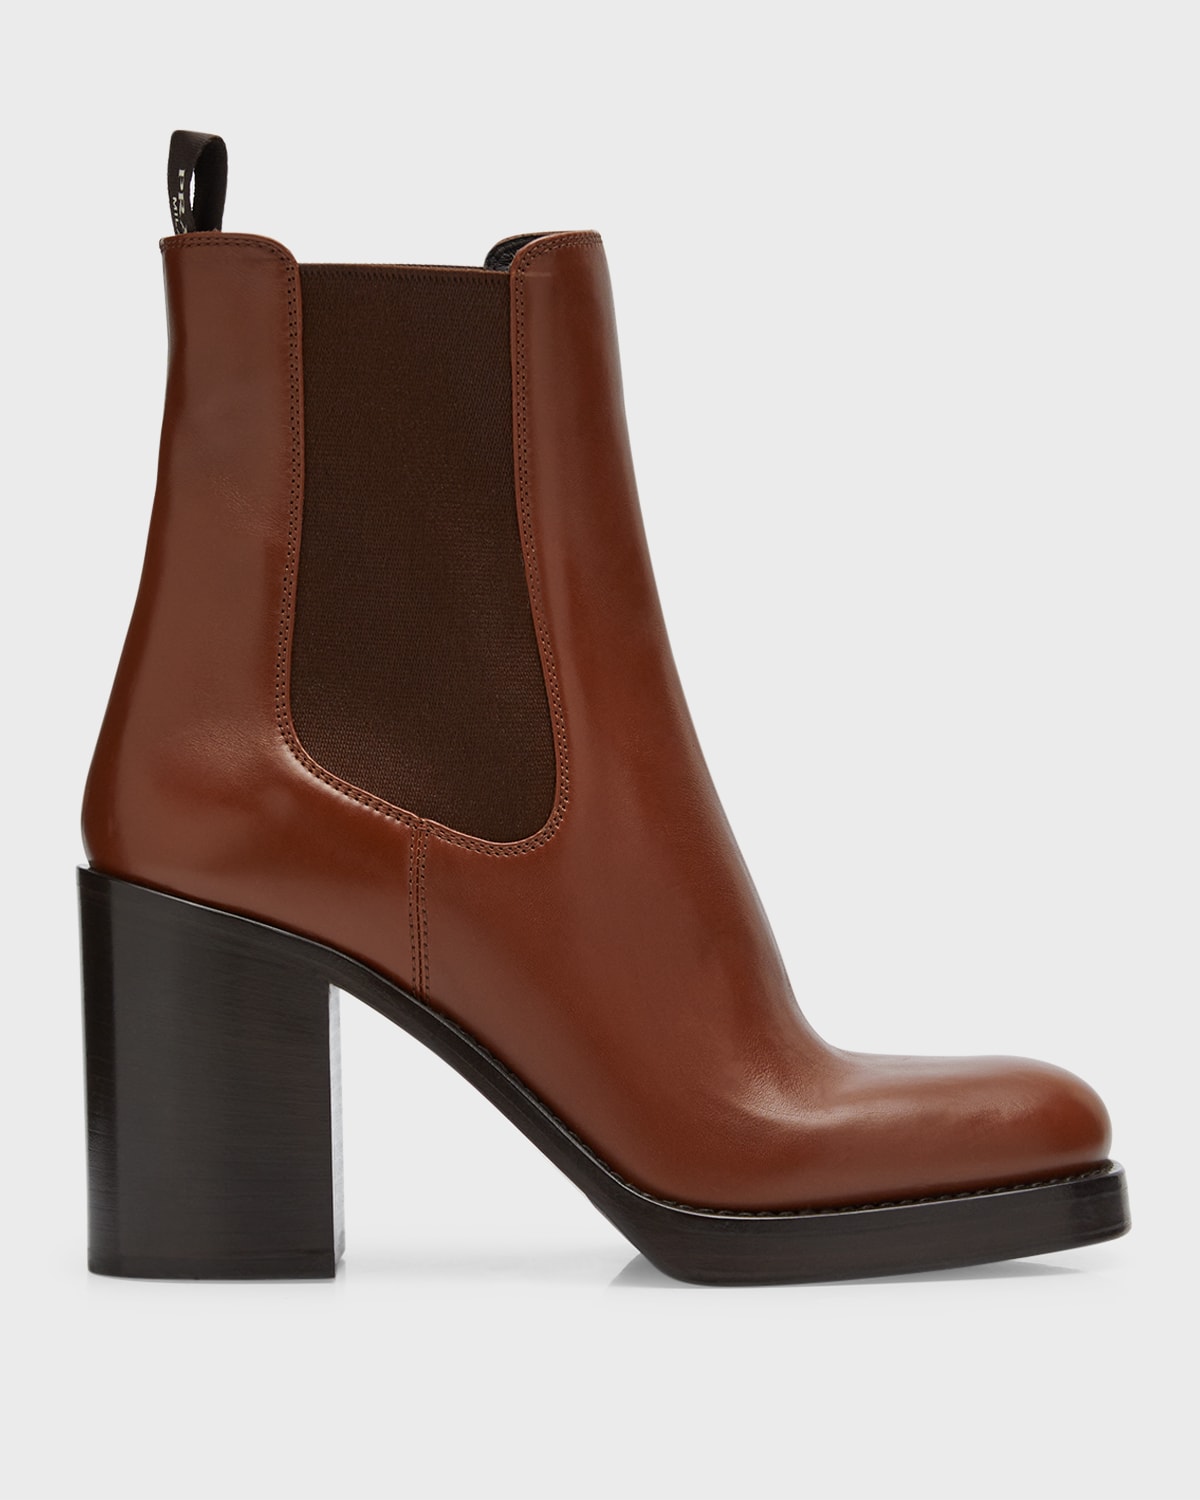 Jimmy Choo Veronique Leather Crystal Chelsea Boots | Neiman Marcus